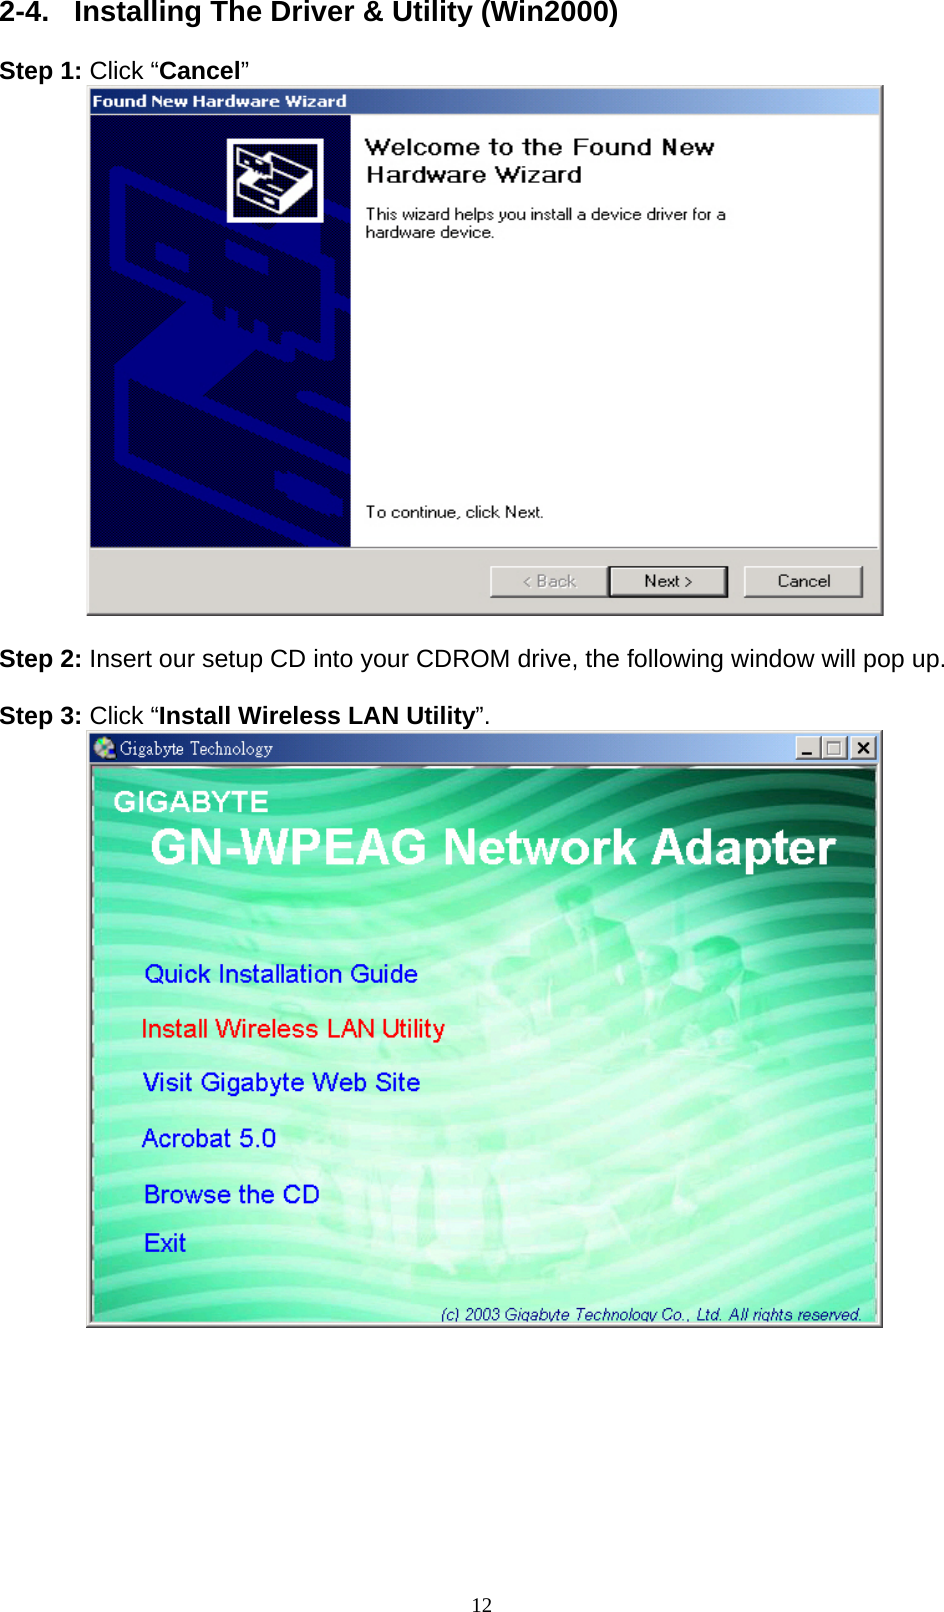 12  2-4.  Installing The Driver &amp; Utility (Win2000)  Step 1: Click “Cancel”           Step 2: Insert our setup CD into your CDROM drive, the following window will pop up.  Step 3: Click “Install Wireless LAN Utility”.           